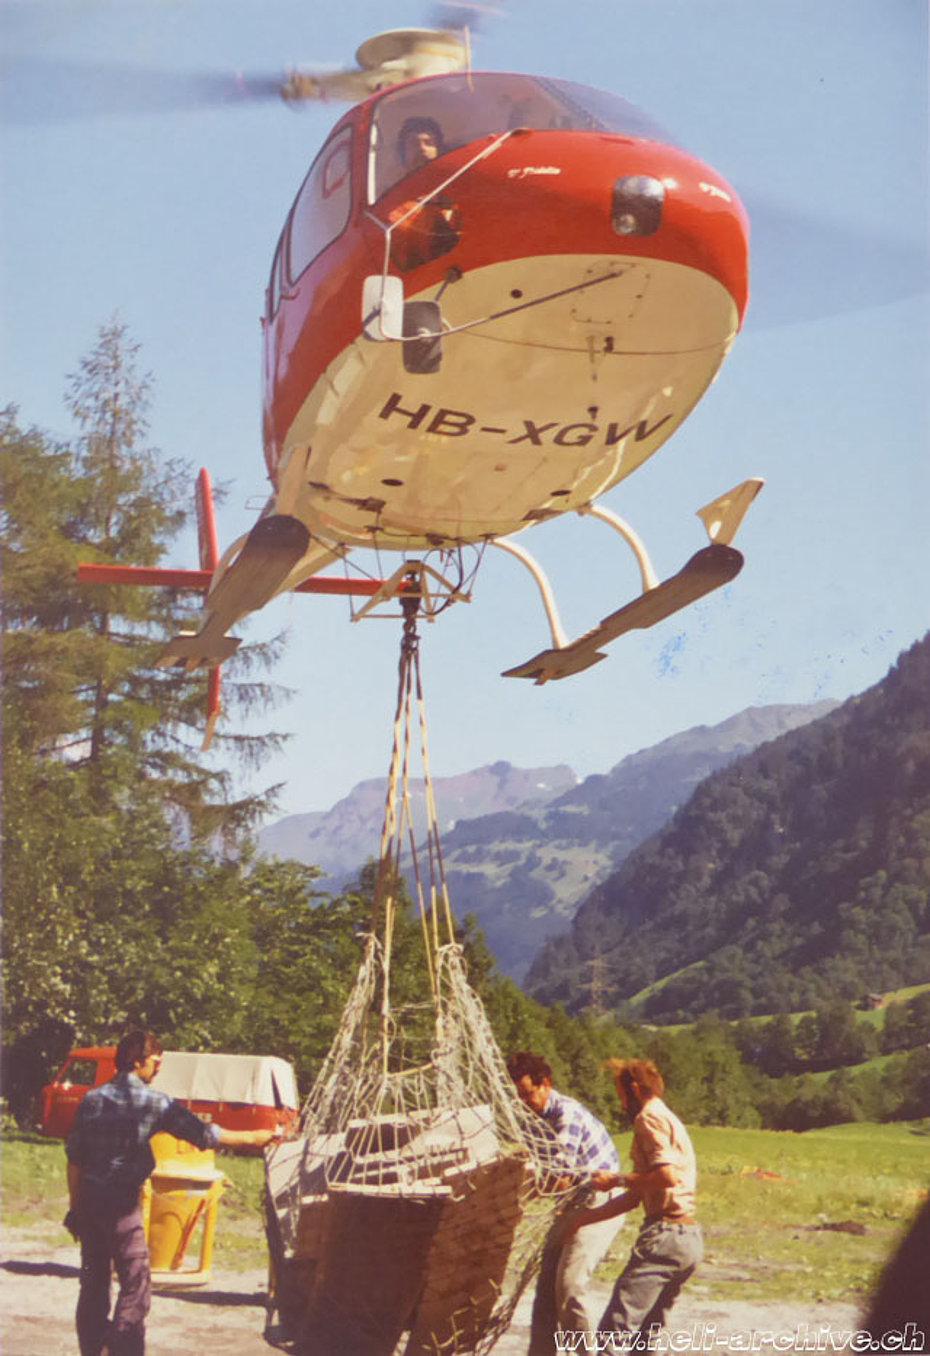 Glarus Alps, early 1980s - The AS 350B Ecureuil HB-XGW piloted by Peter Kolesnik transports a net of building material (family Kolesnik)